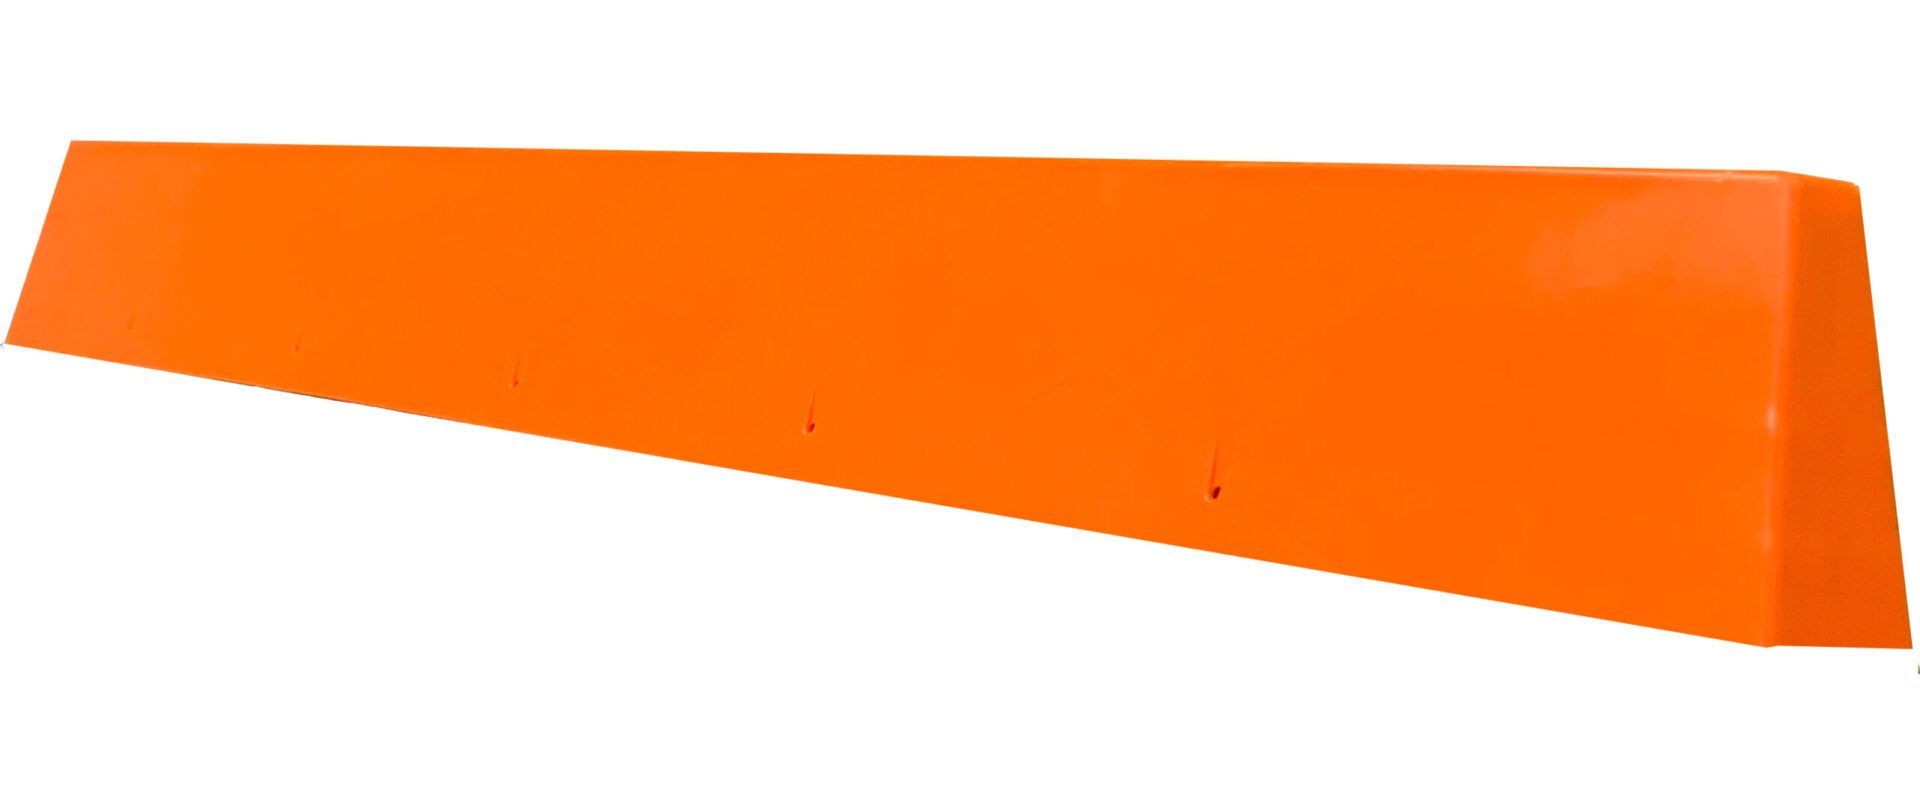 Safeline-FP's Rebar Protector sits against a white background. The orange construction material sits at an angle for a defined view of the passive fall protection accessory.